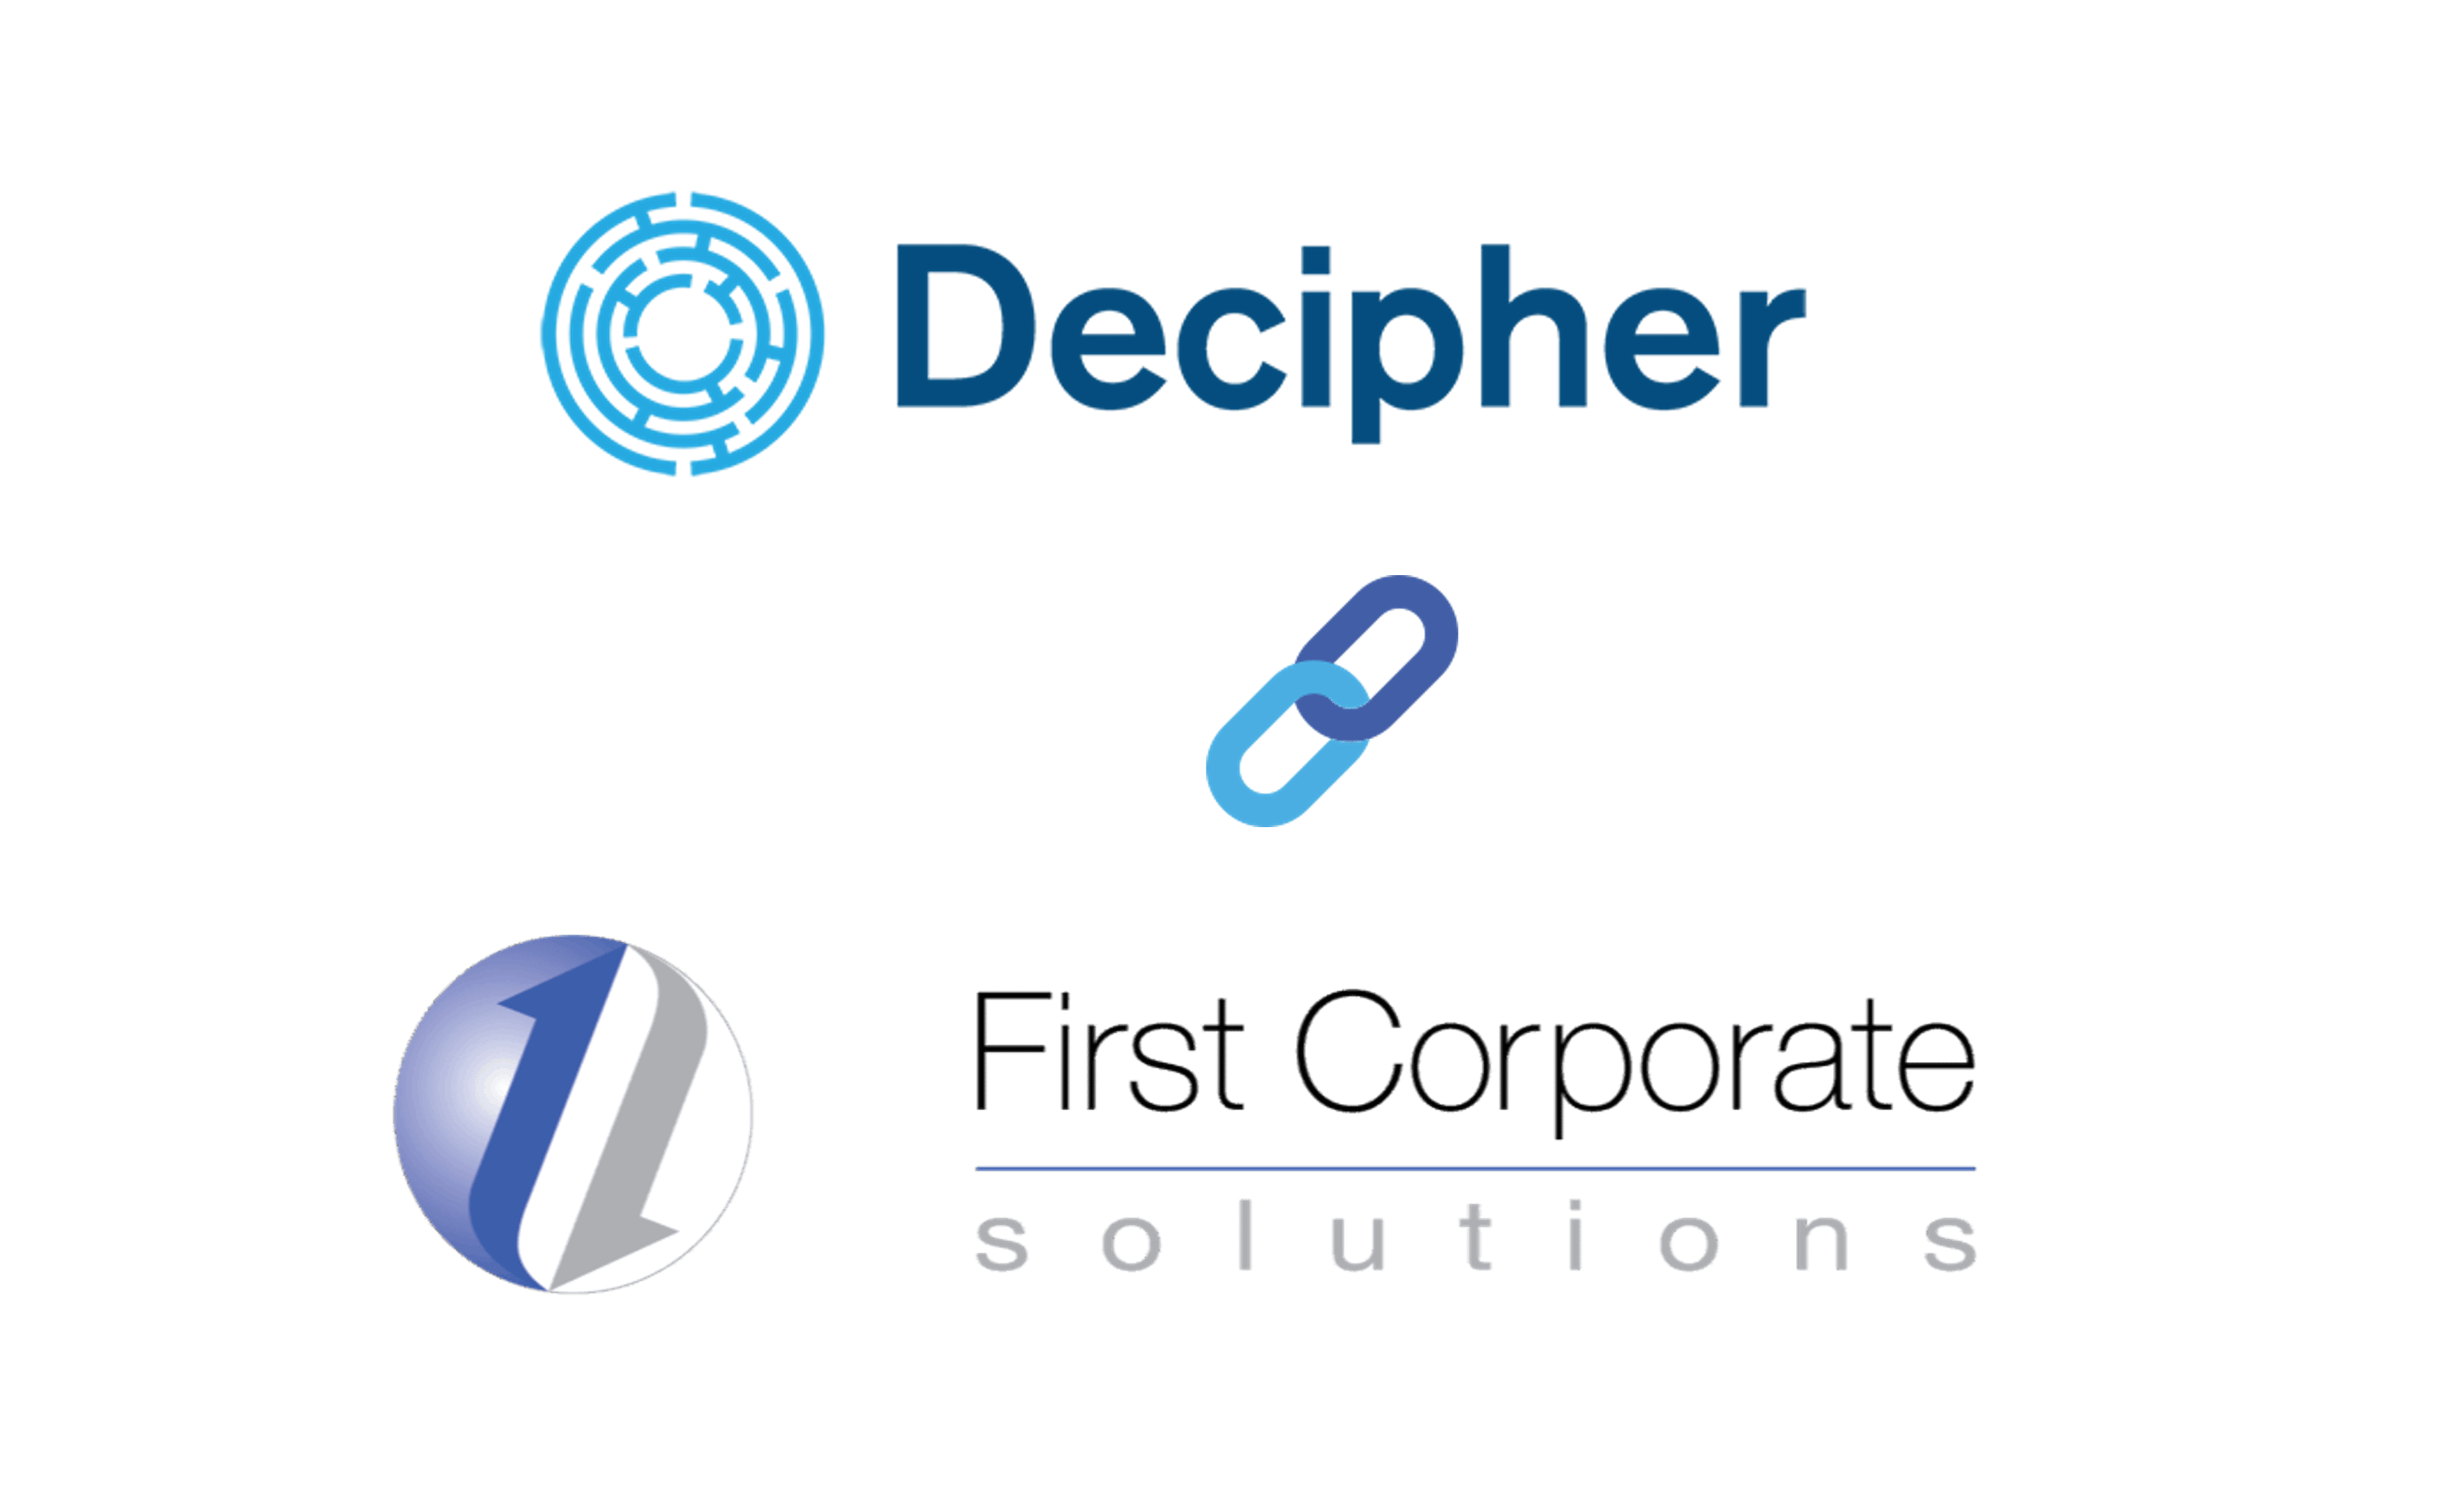 Decipher Integrates with First Corporate Solutions